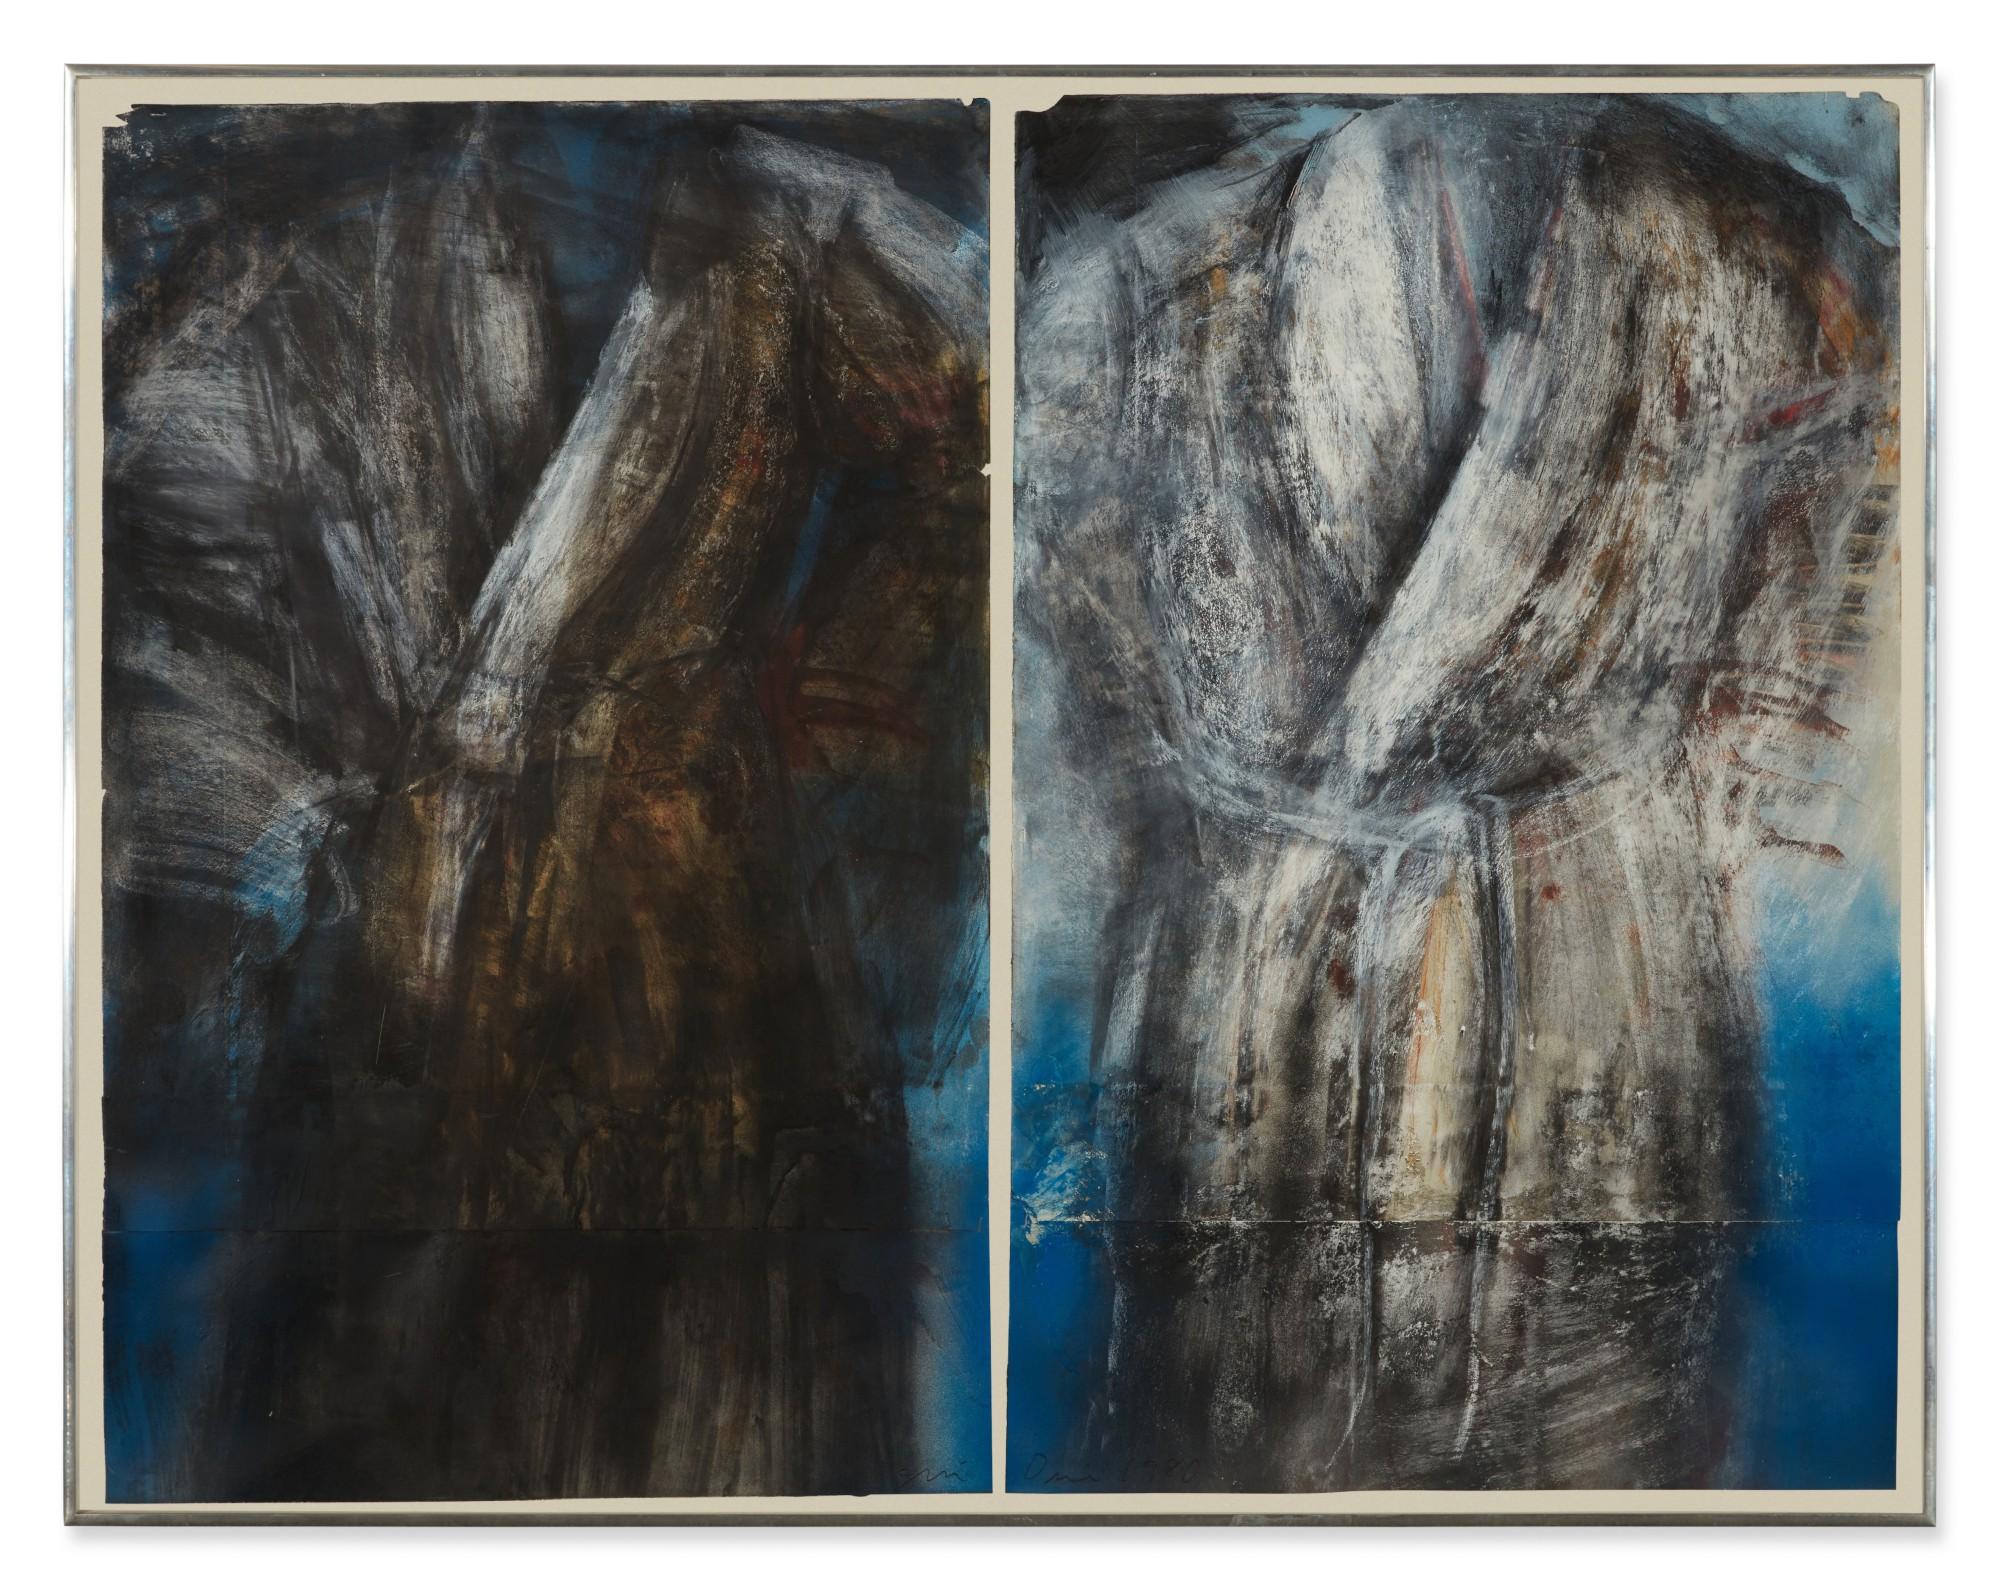 Large, iconic robe painting by legendary American artist Jim Dine. 

“What motivated you to begin the series of Bathrobes pictures?